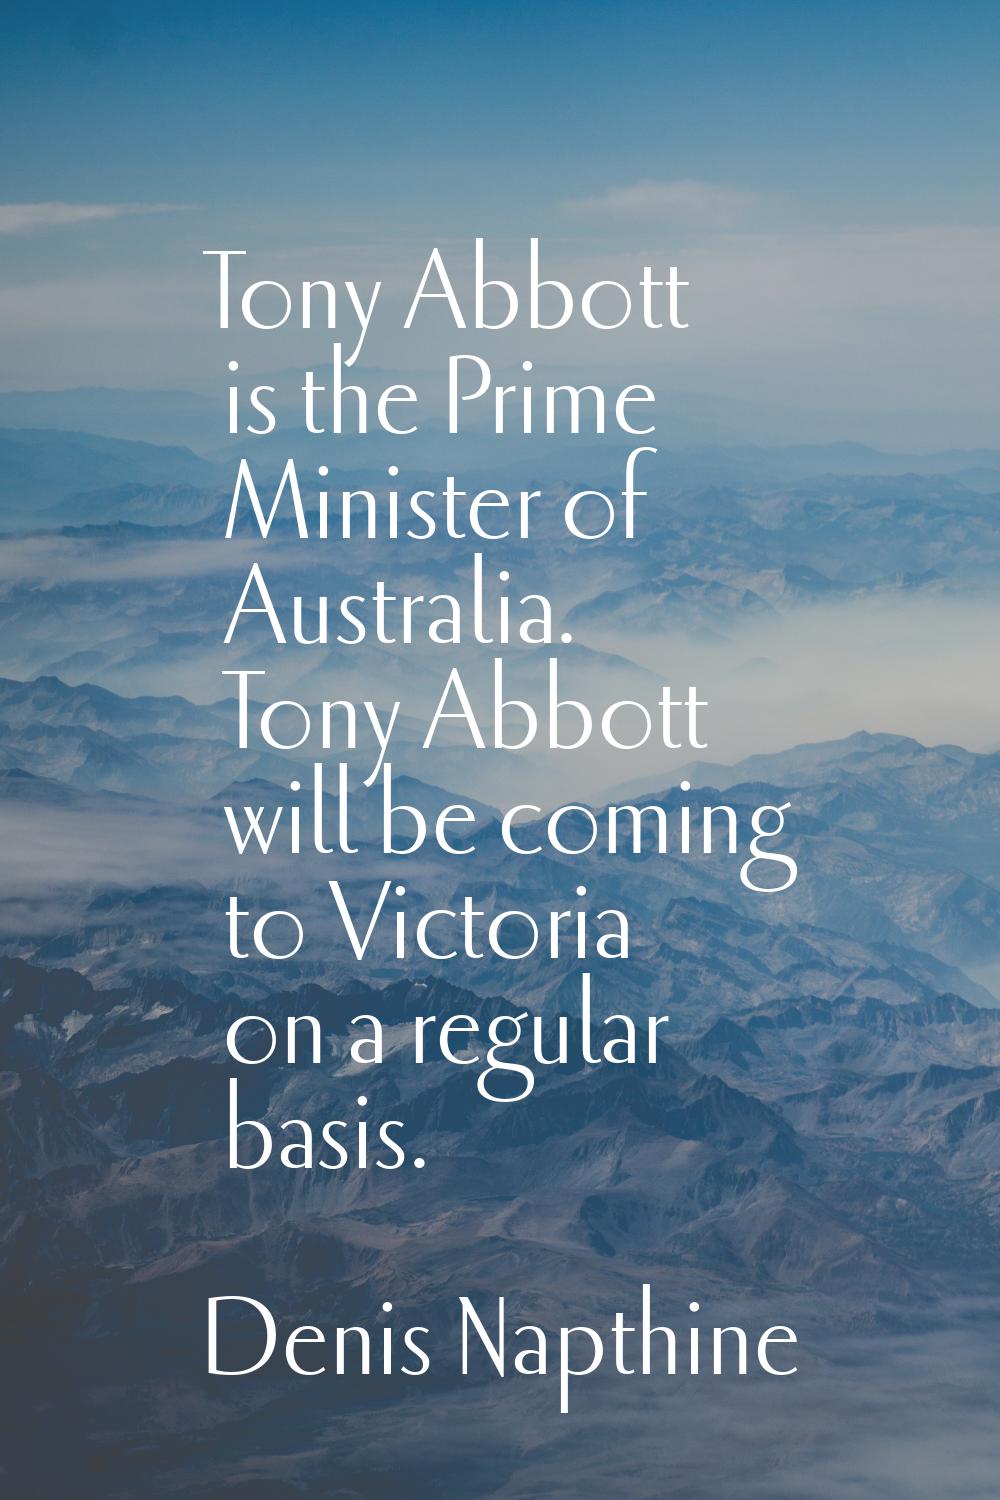 Tony Abbott is the Prime Minister of Australia. Tony Abbott will be coming to Victoria on a regular